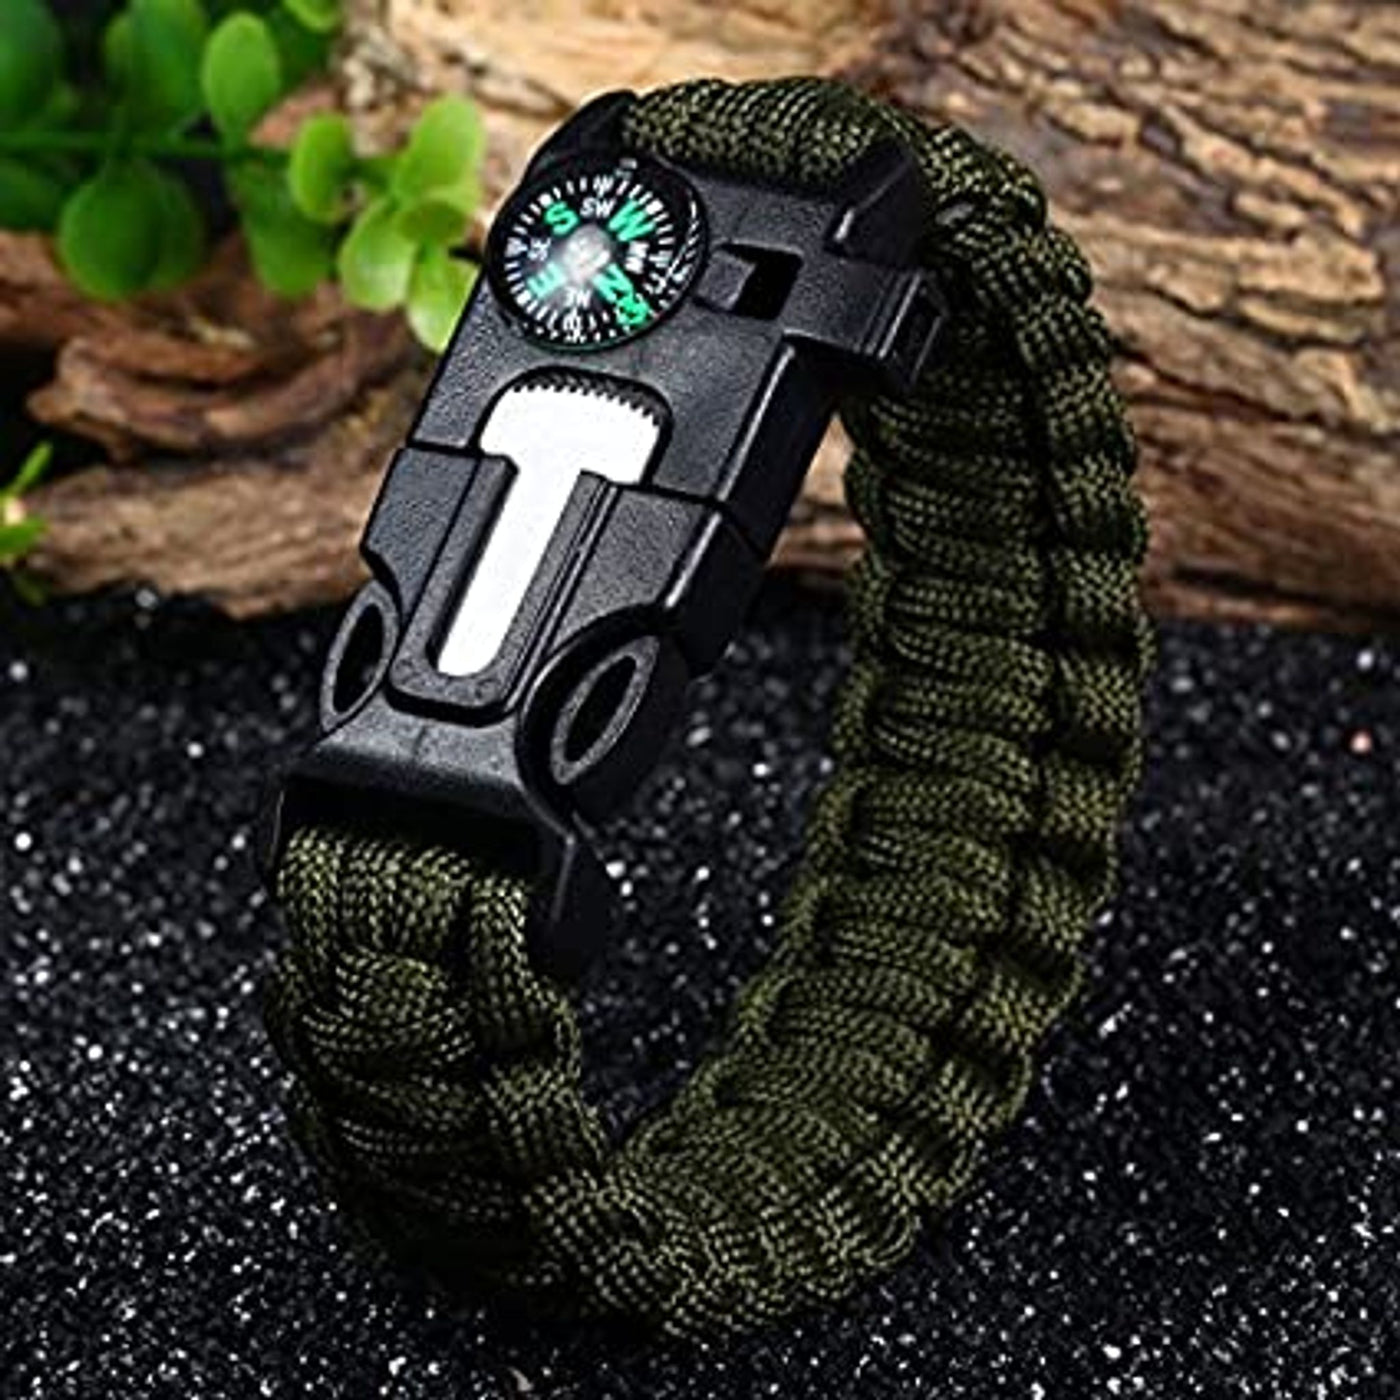 Customizable Type 1 Paracord Survival Bracelet With Hope Ribbon Ideal For  Outdoor Activities And Camping From Victor_wong, $0.77